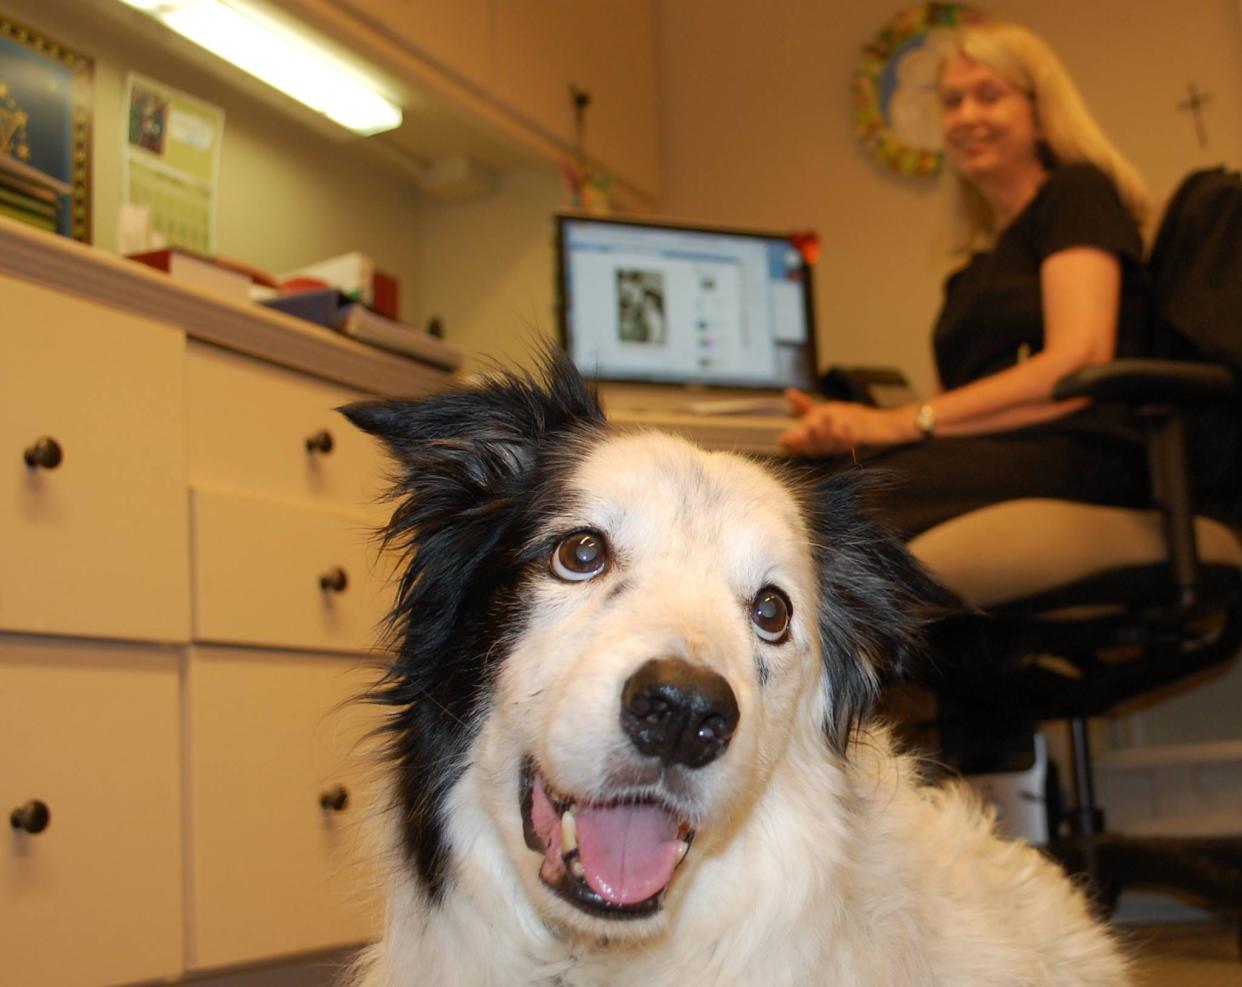 Casey the border collie at an office in the author’s town.